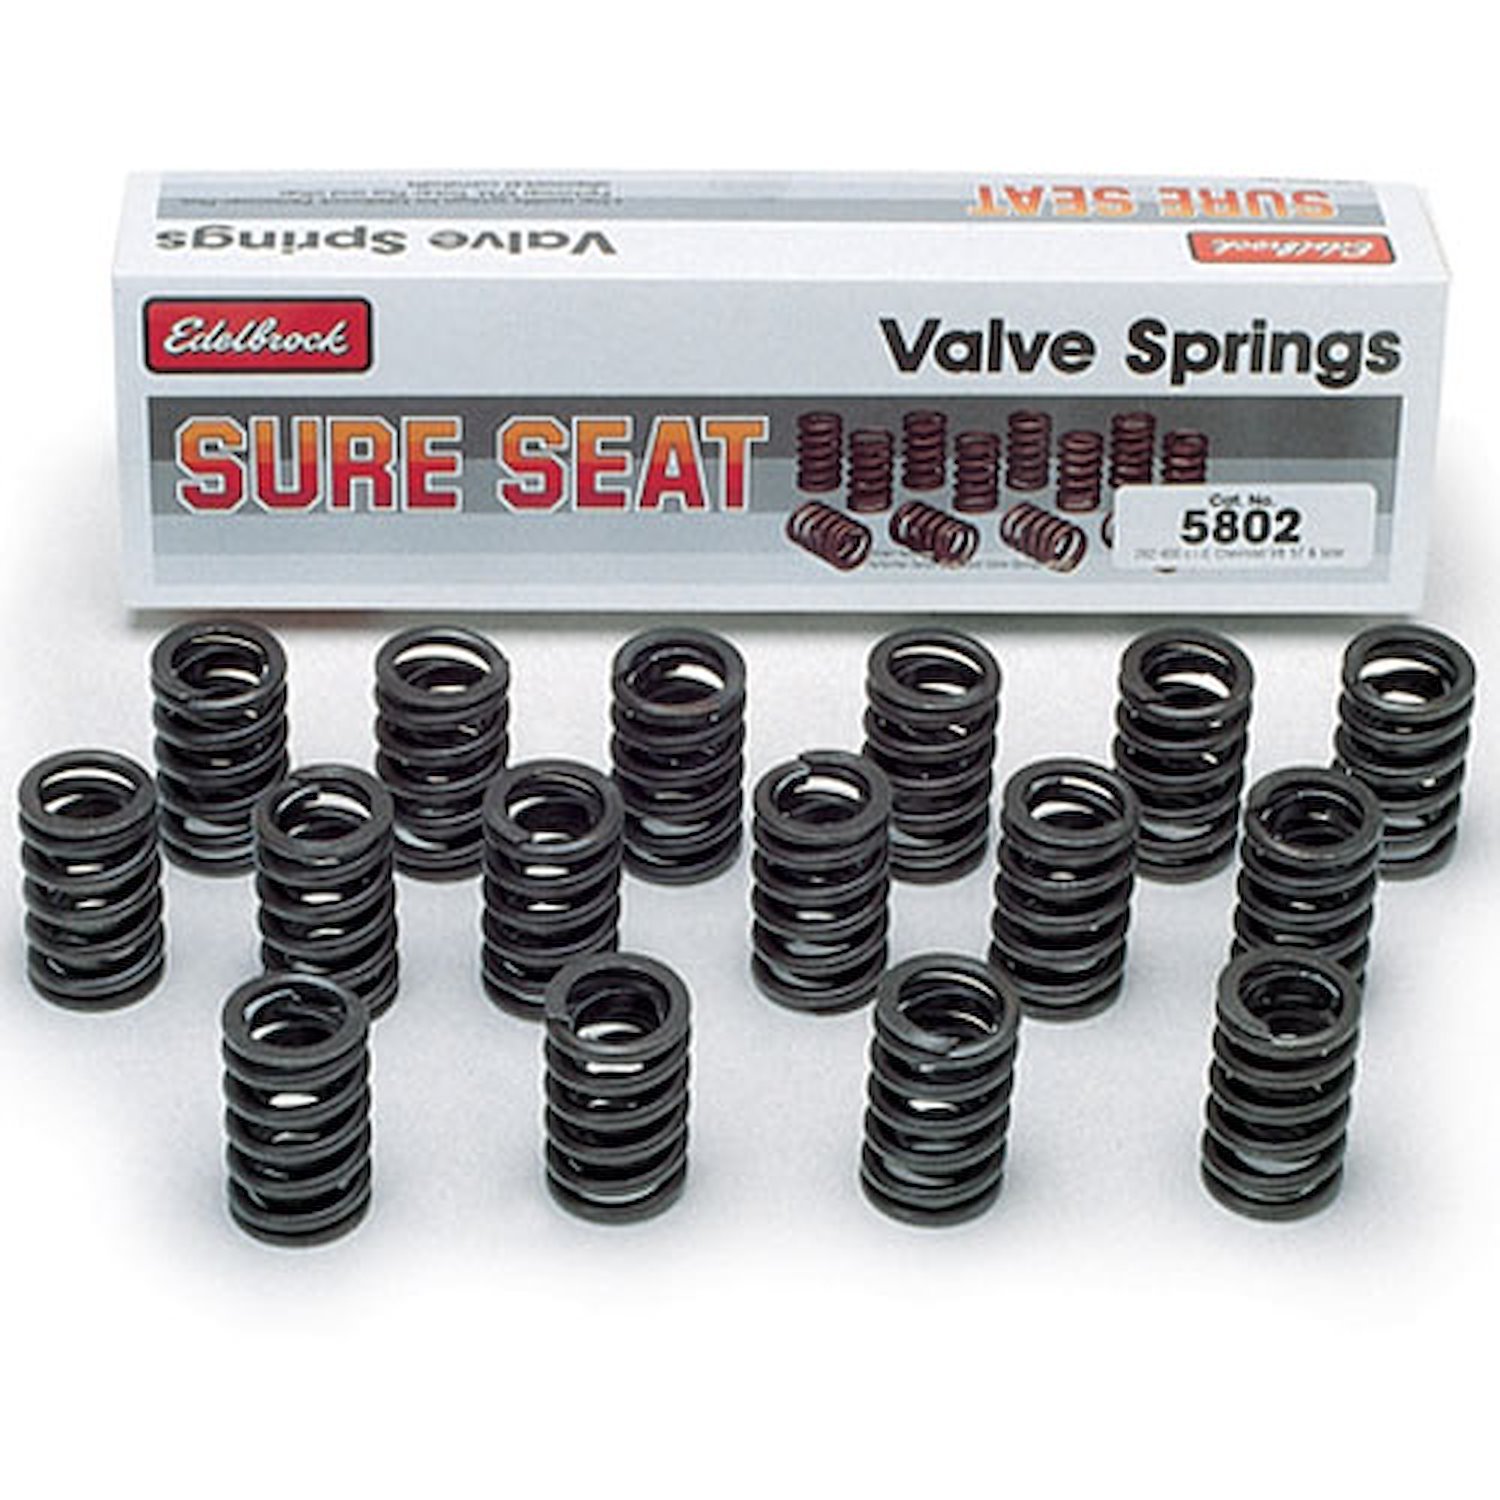 Sure Seat Replacement Valve Springs for Edelbrock Aluminum Heads